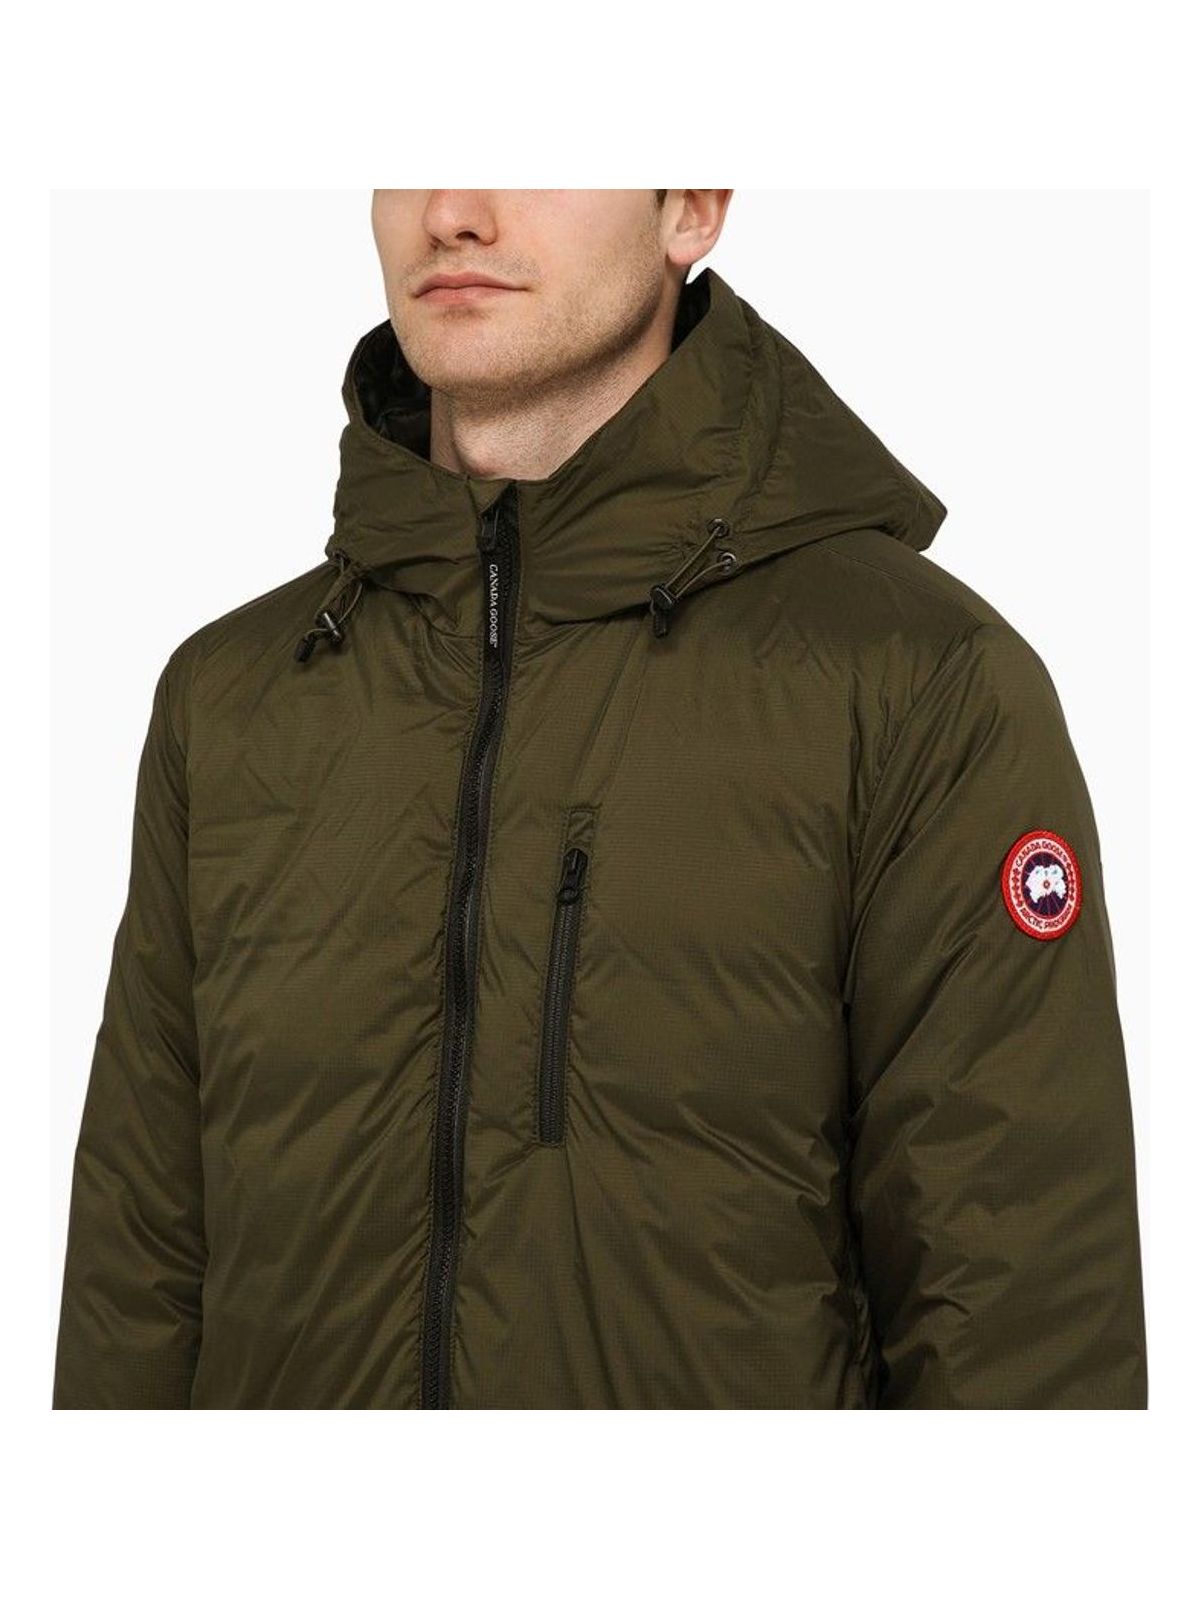 49 CANADA GOOSE  LODGE DOWN JACKET MILITARY GREEN